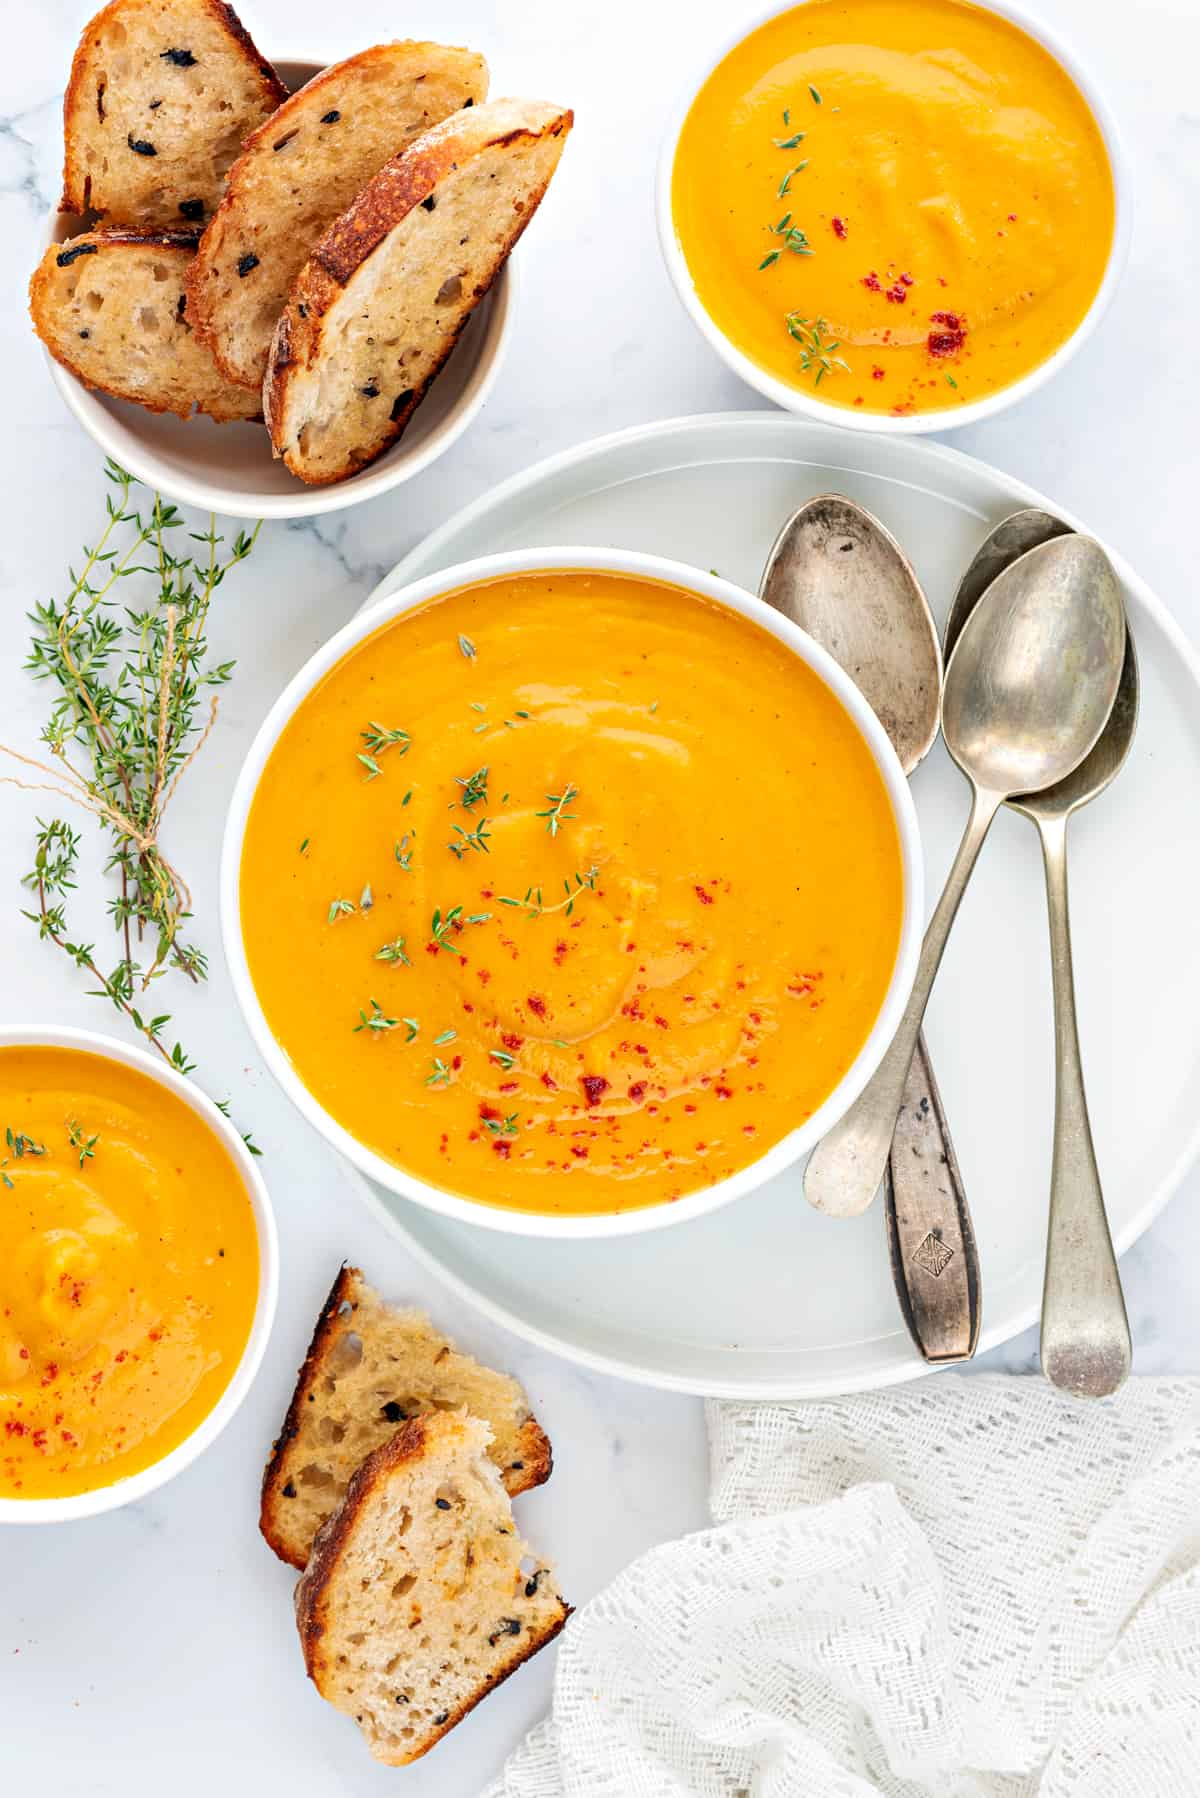 Curried butternut squash soup served in 3 white bowl with toasted bread on the side.